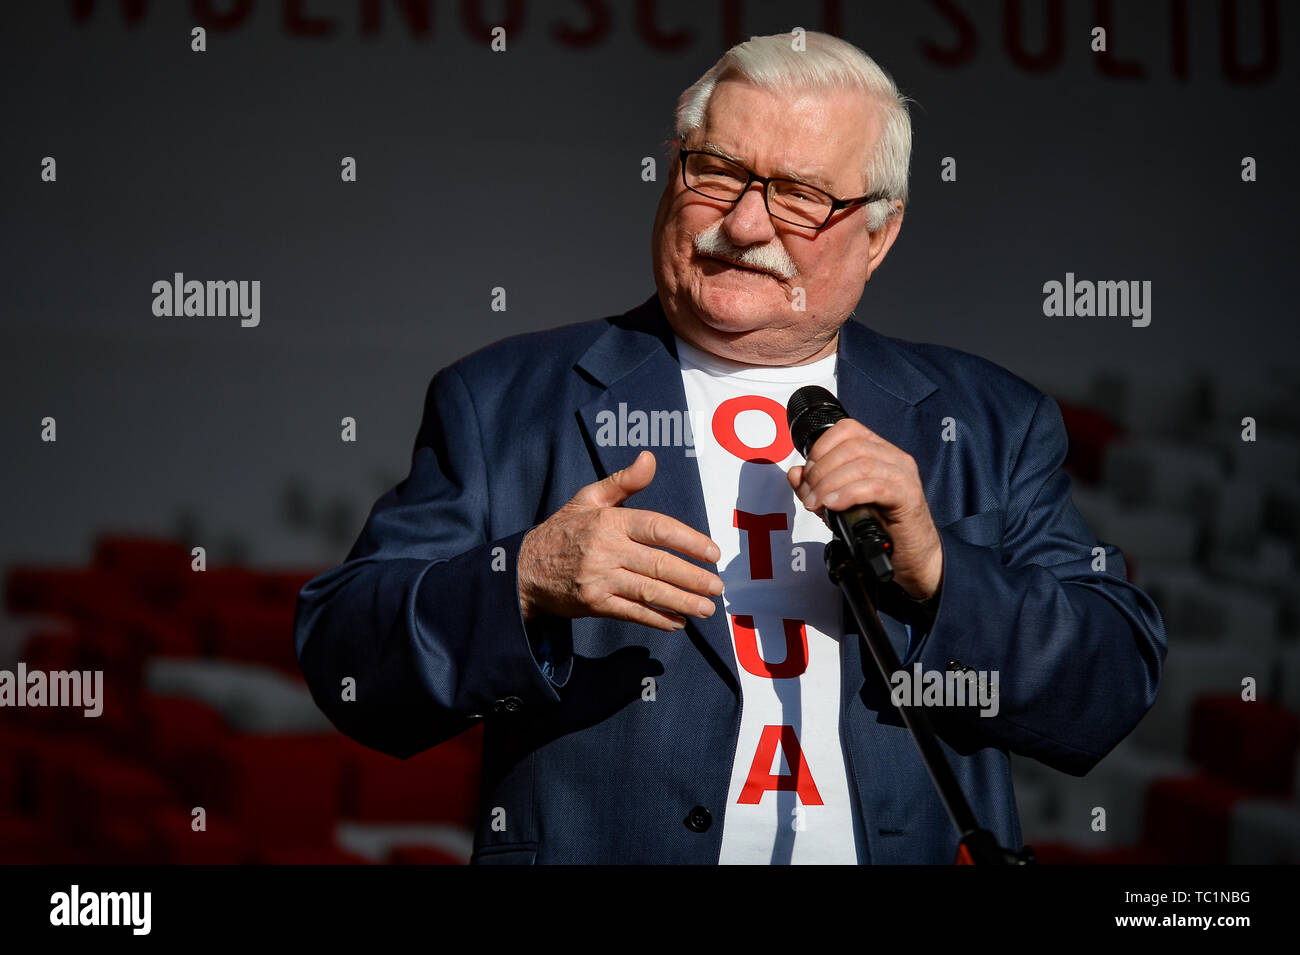 Lech Walesa speaks during mass meeting of Freedom and Solidarity Days in Gdansk. Gdansk, in the 1980s became the birthplace of the Solidarity movement, which brought an end to Communism in Poland and played a huge part to end the Soviet Union. On June 04, 1989, the first free elections in the country took place since 1928, and the first since the communist era. Stock Photo